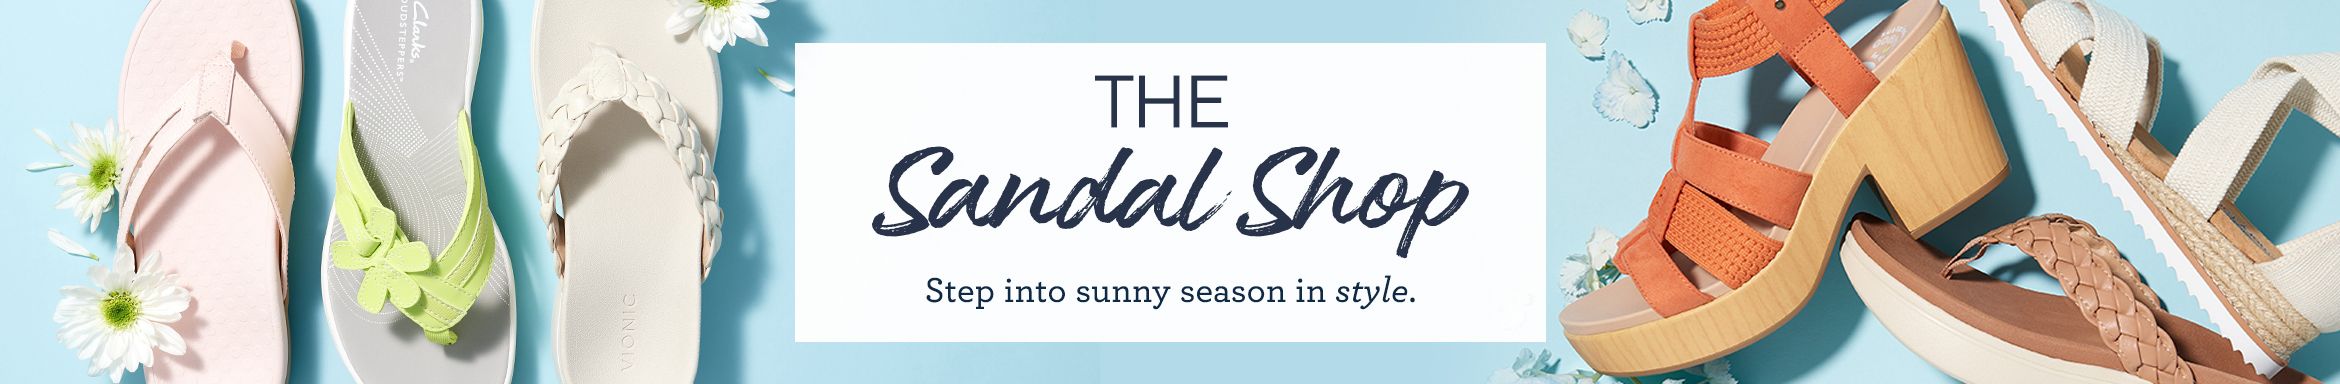 The Sandal Shop: Step into sunny season in style.